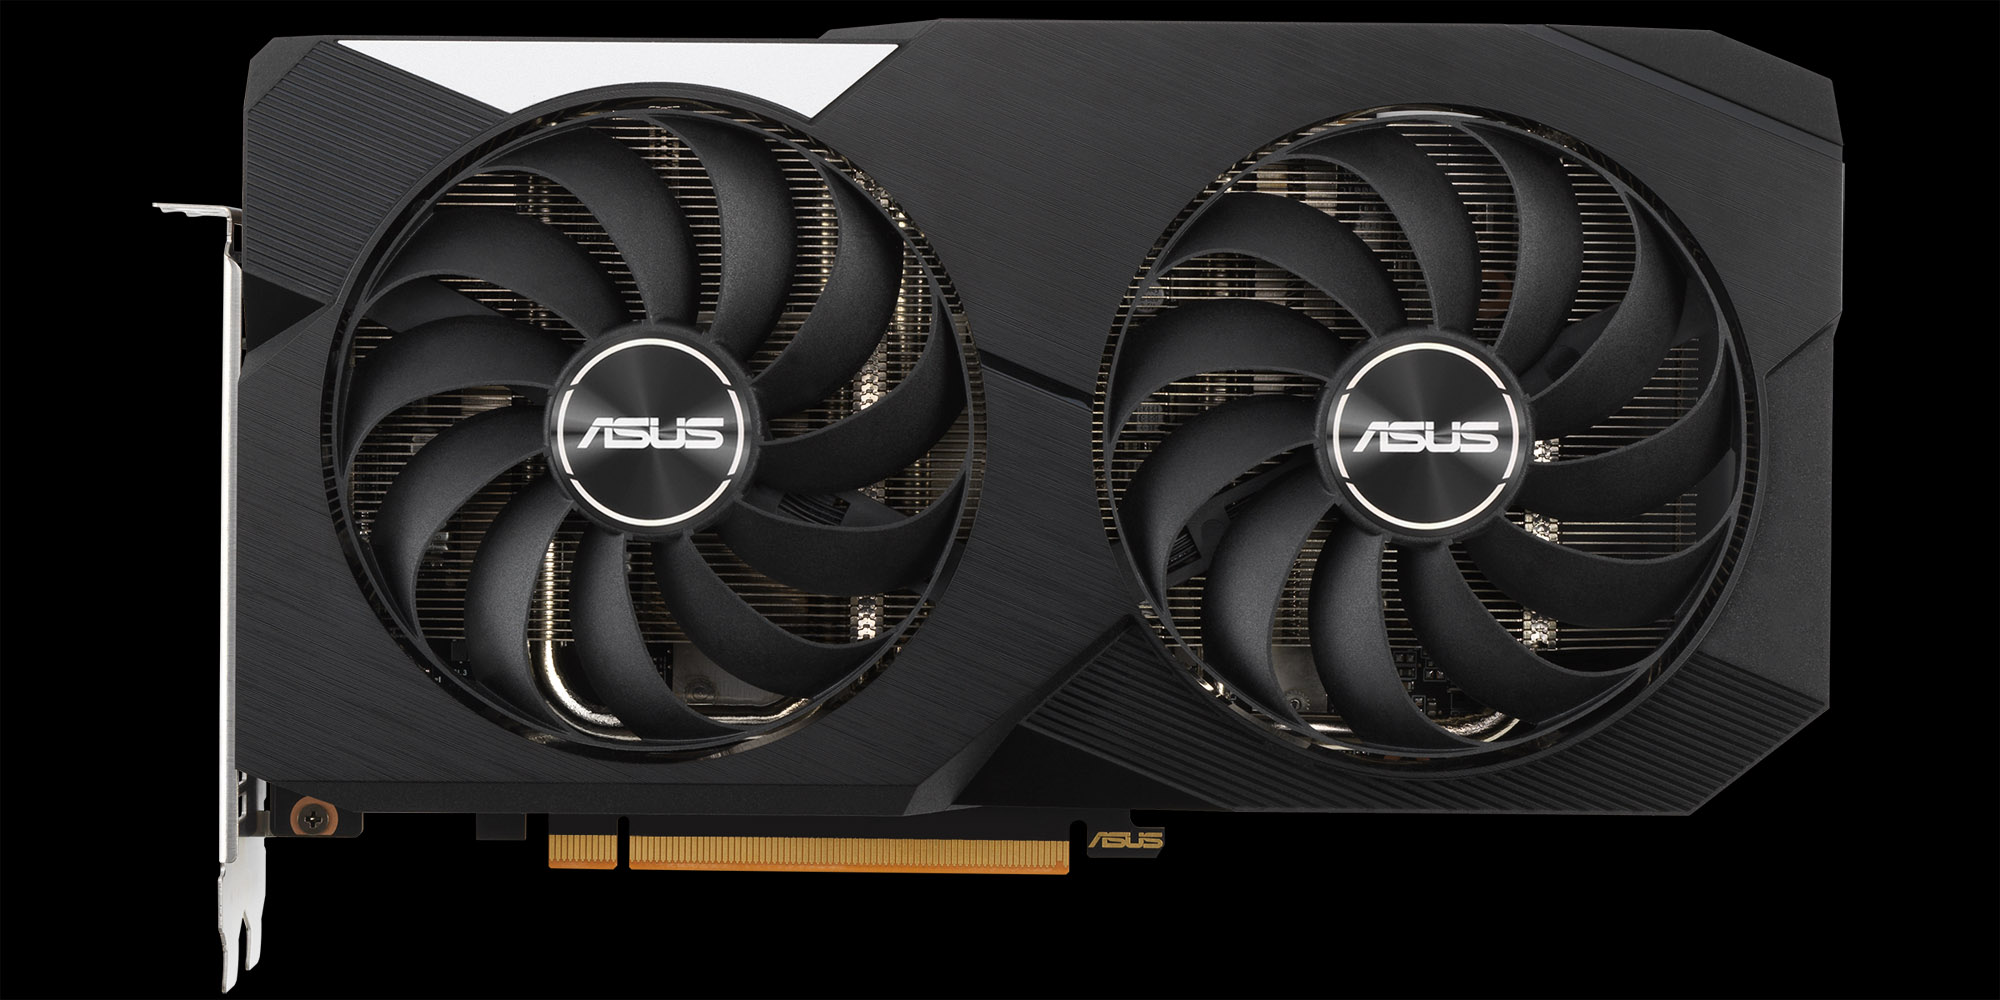 An image of the ASUS Dual Radeon RX 6650 XT graphics card on a black background.